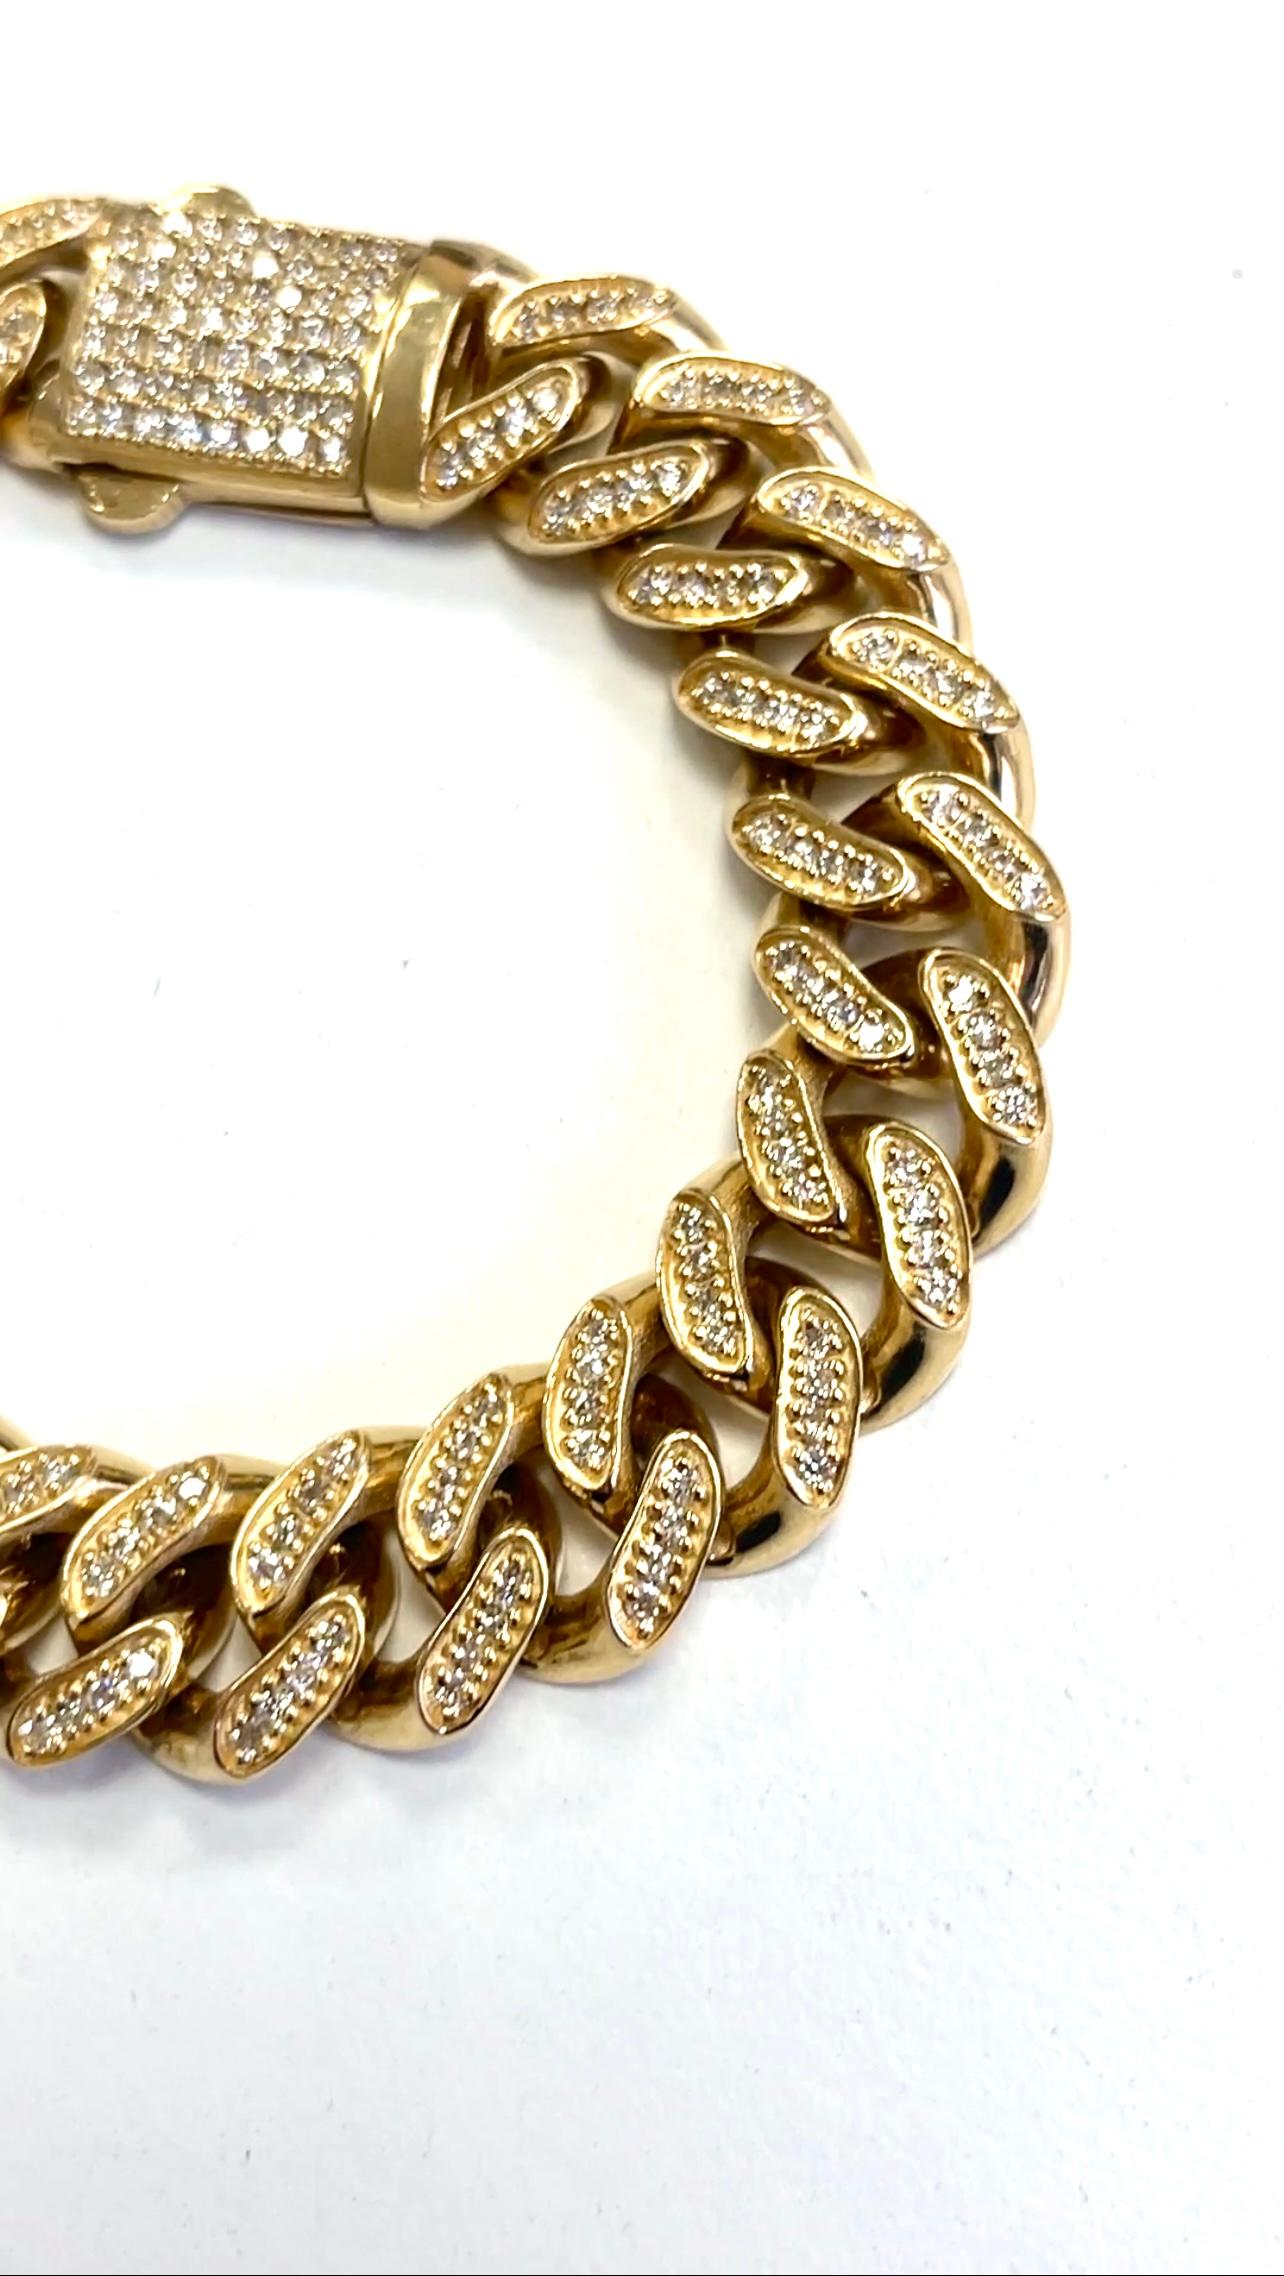 Bold and dazzling 4.70 cts all natural diamonds set in 14k yellow gold cuban link bracelet. 
7.7 inches length, average G-VS,12.7mm width, 29.06 grams

*Free shipping within the U.S.*